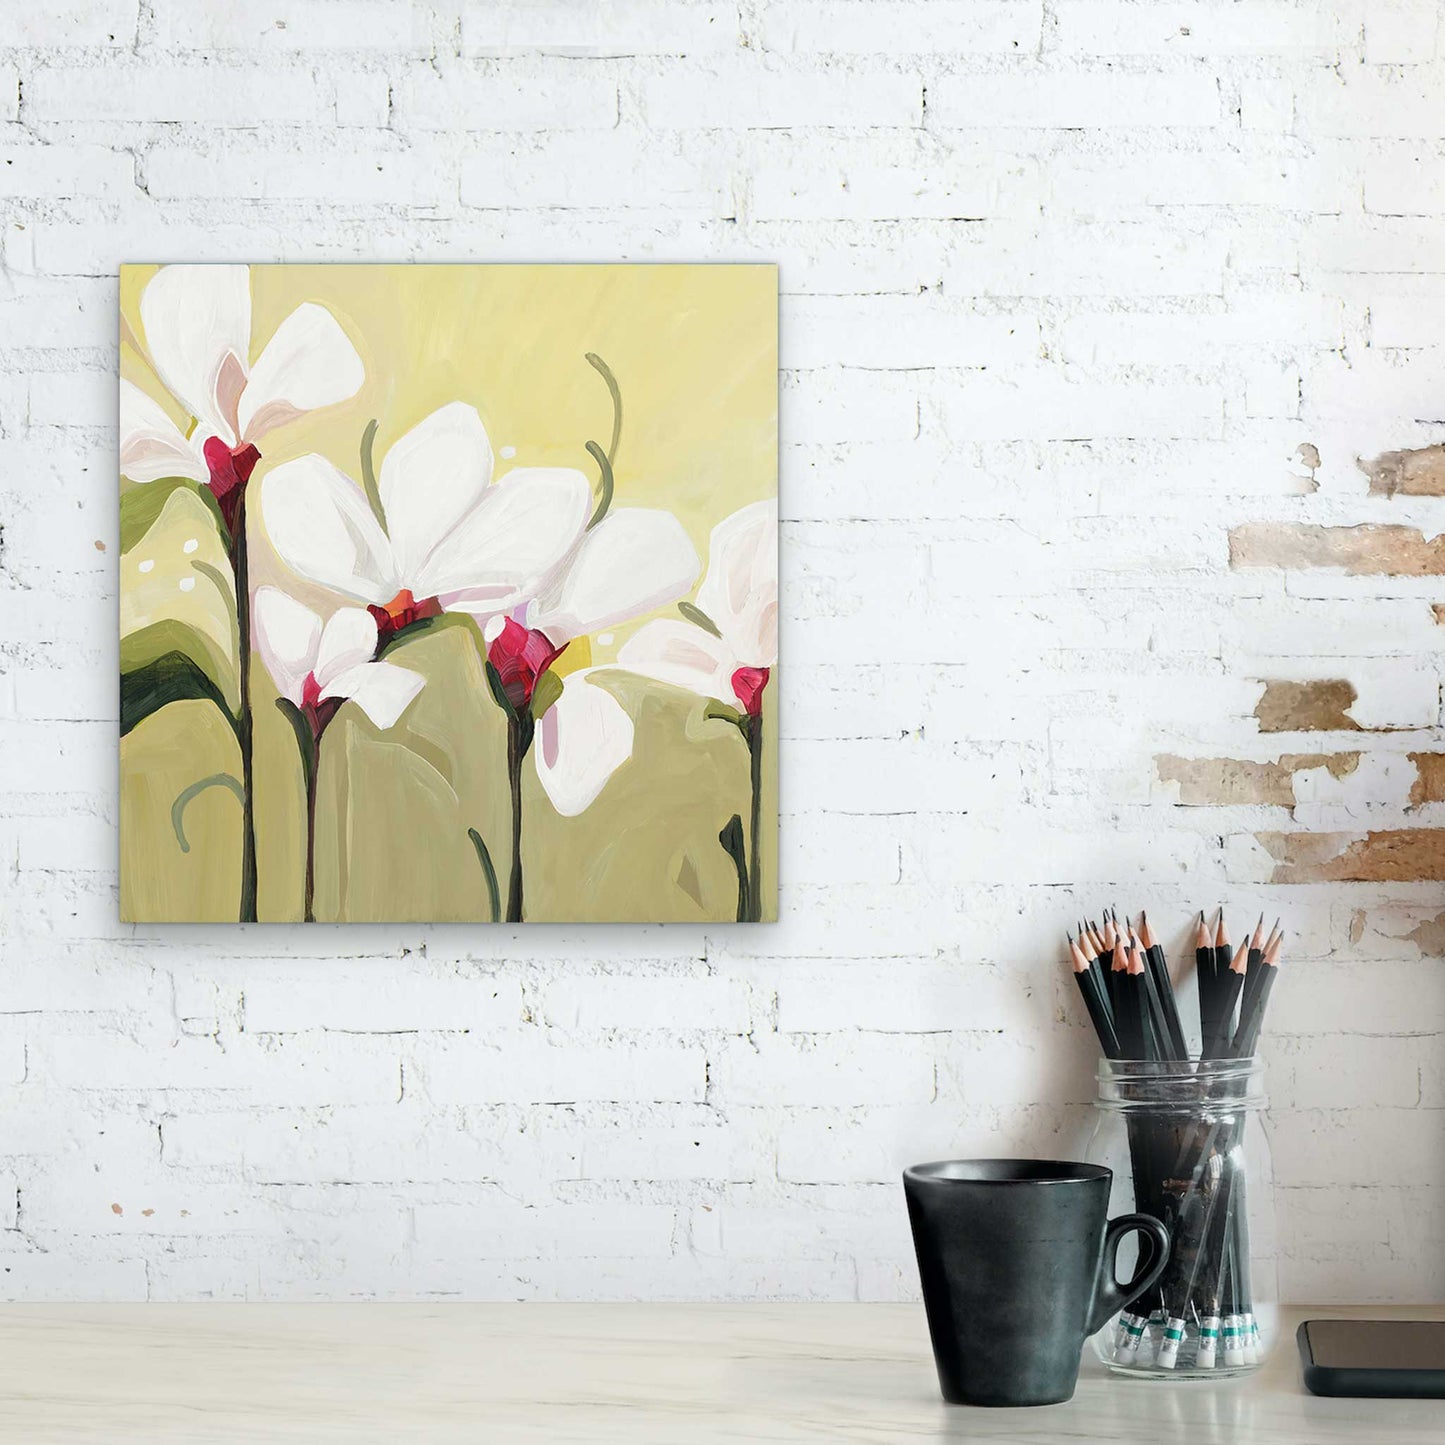 an acrylic flower painting of delicate white flowers set against a sage green and yellow background